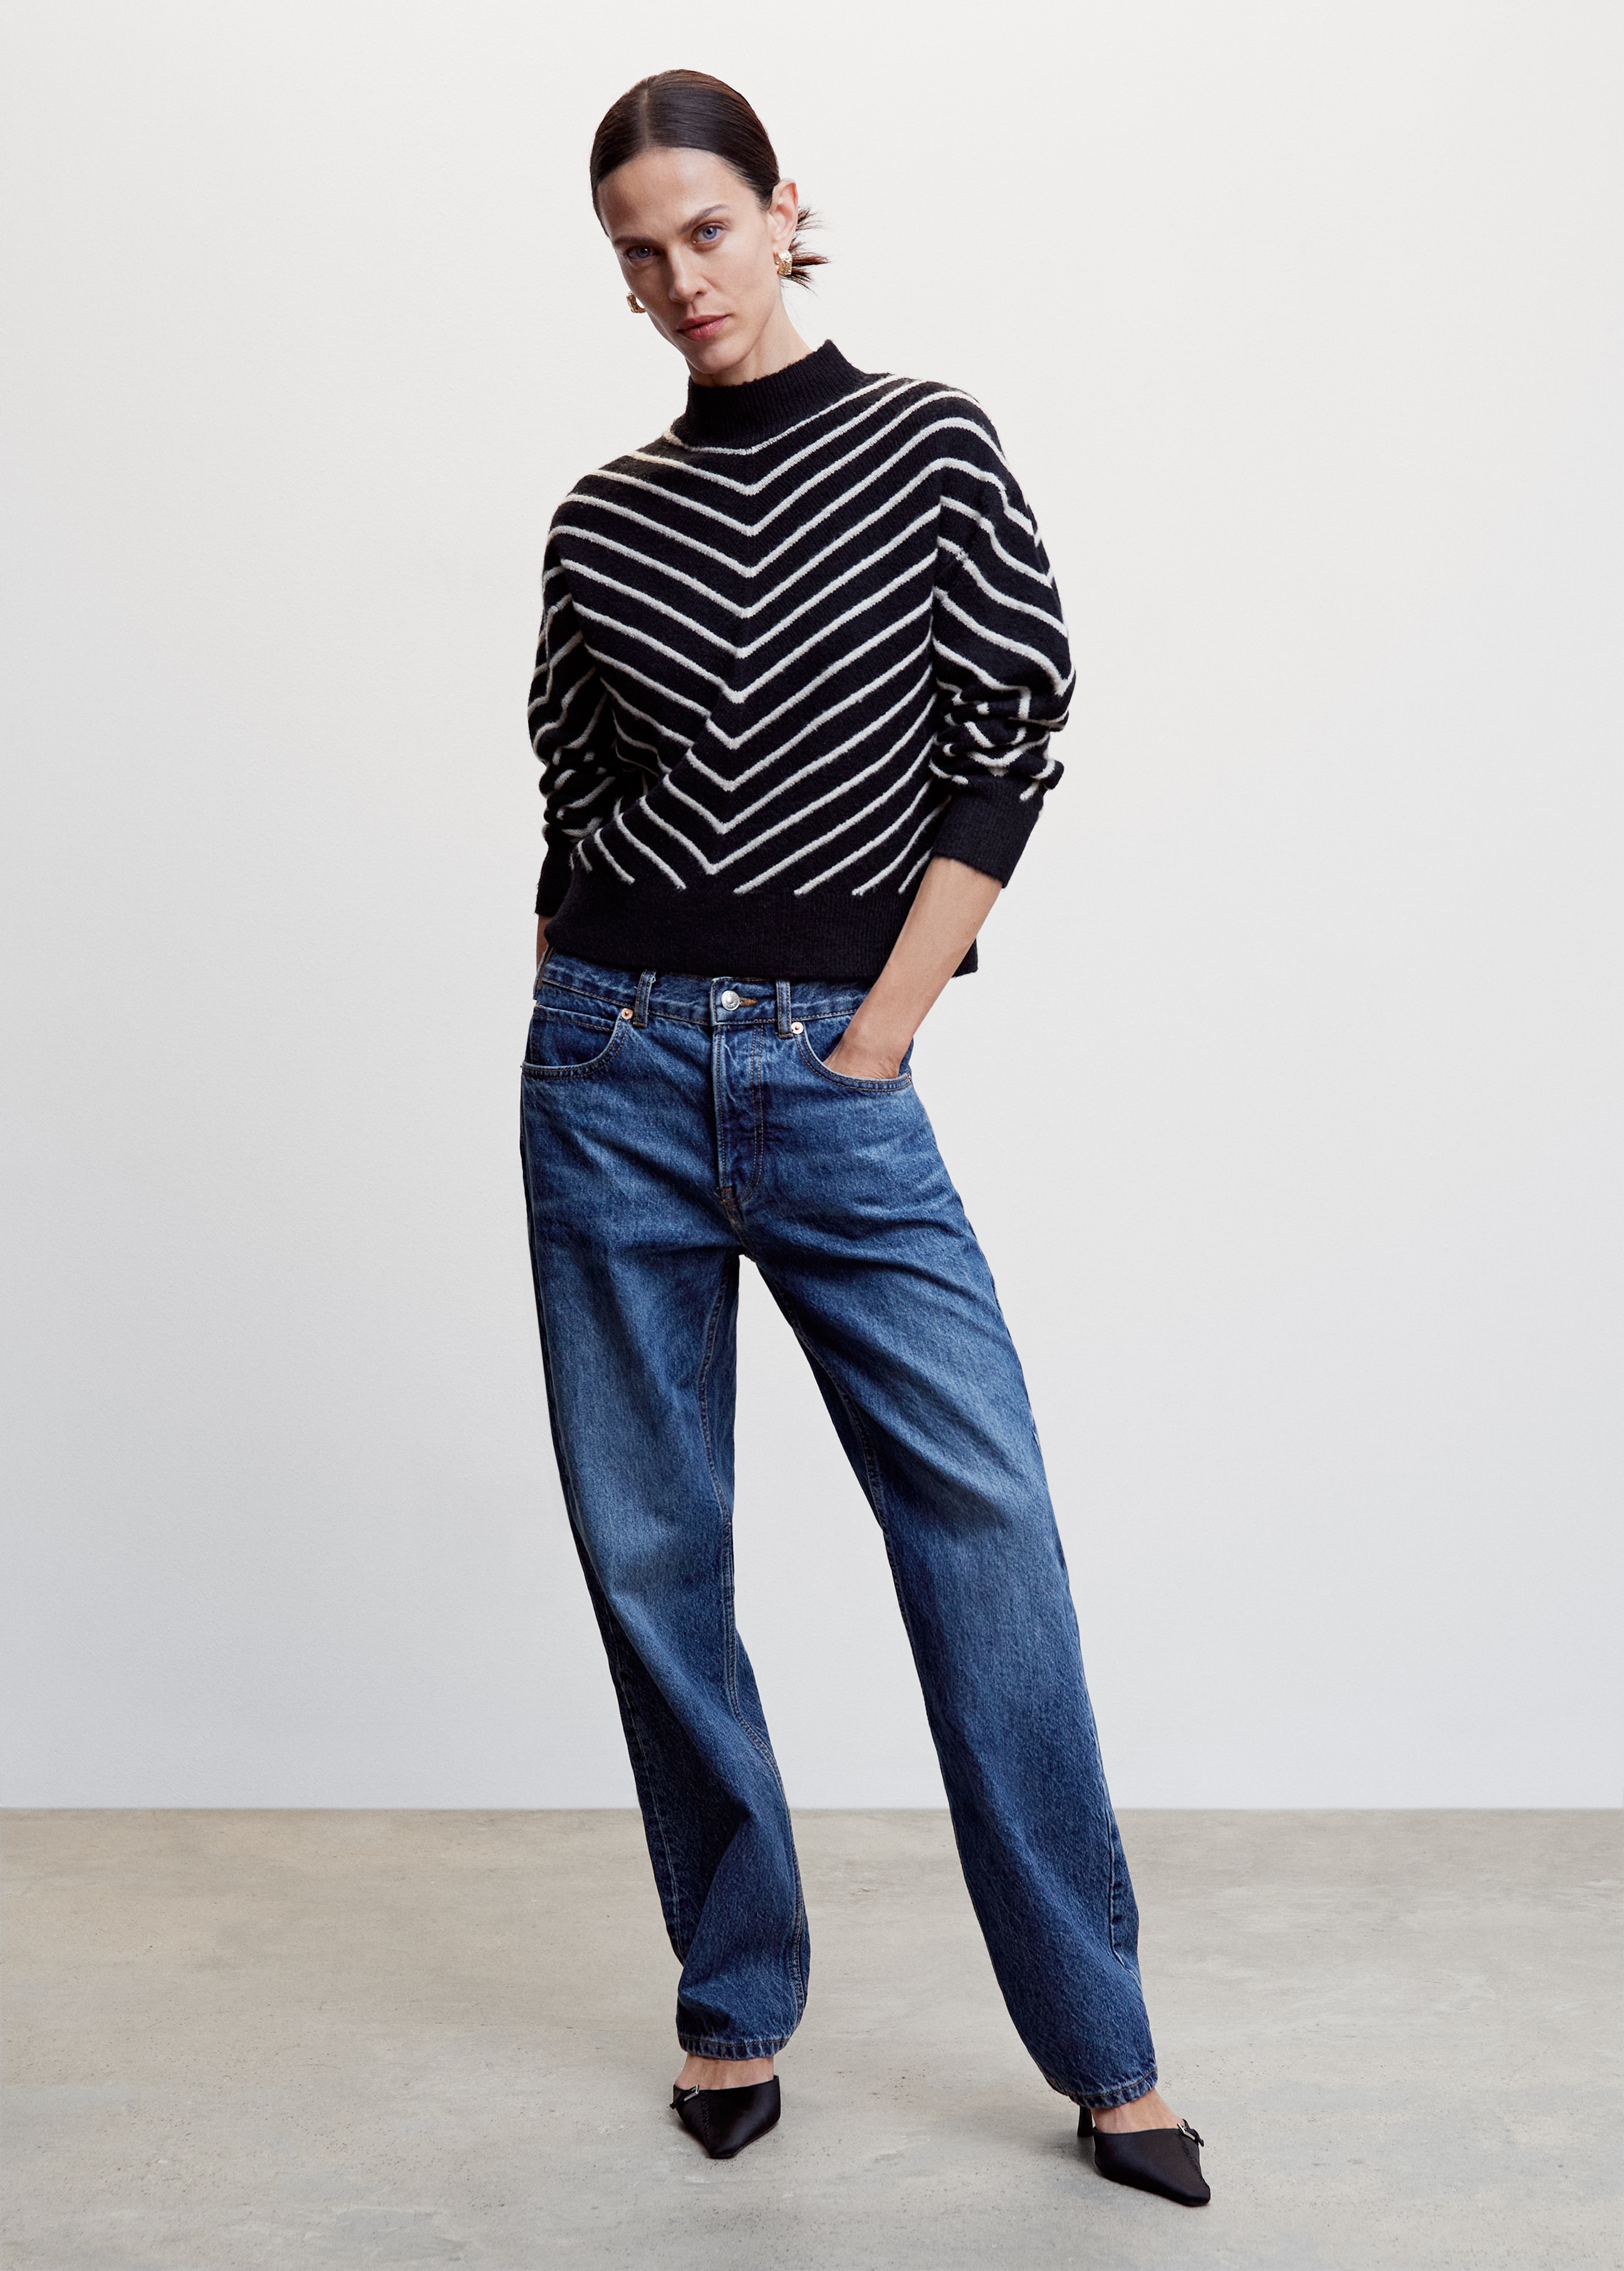 Stripe-print sweater with Perkins neck - General plane